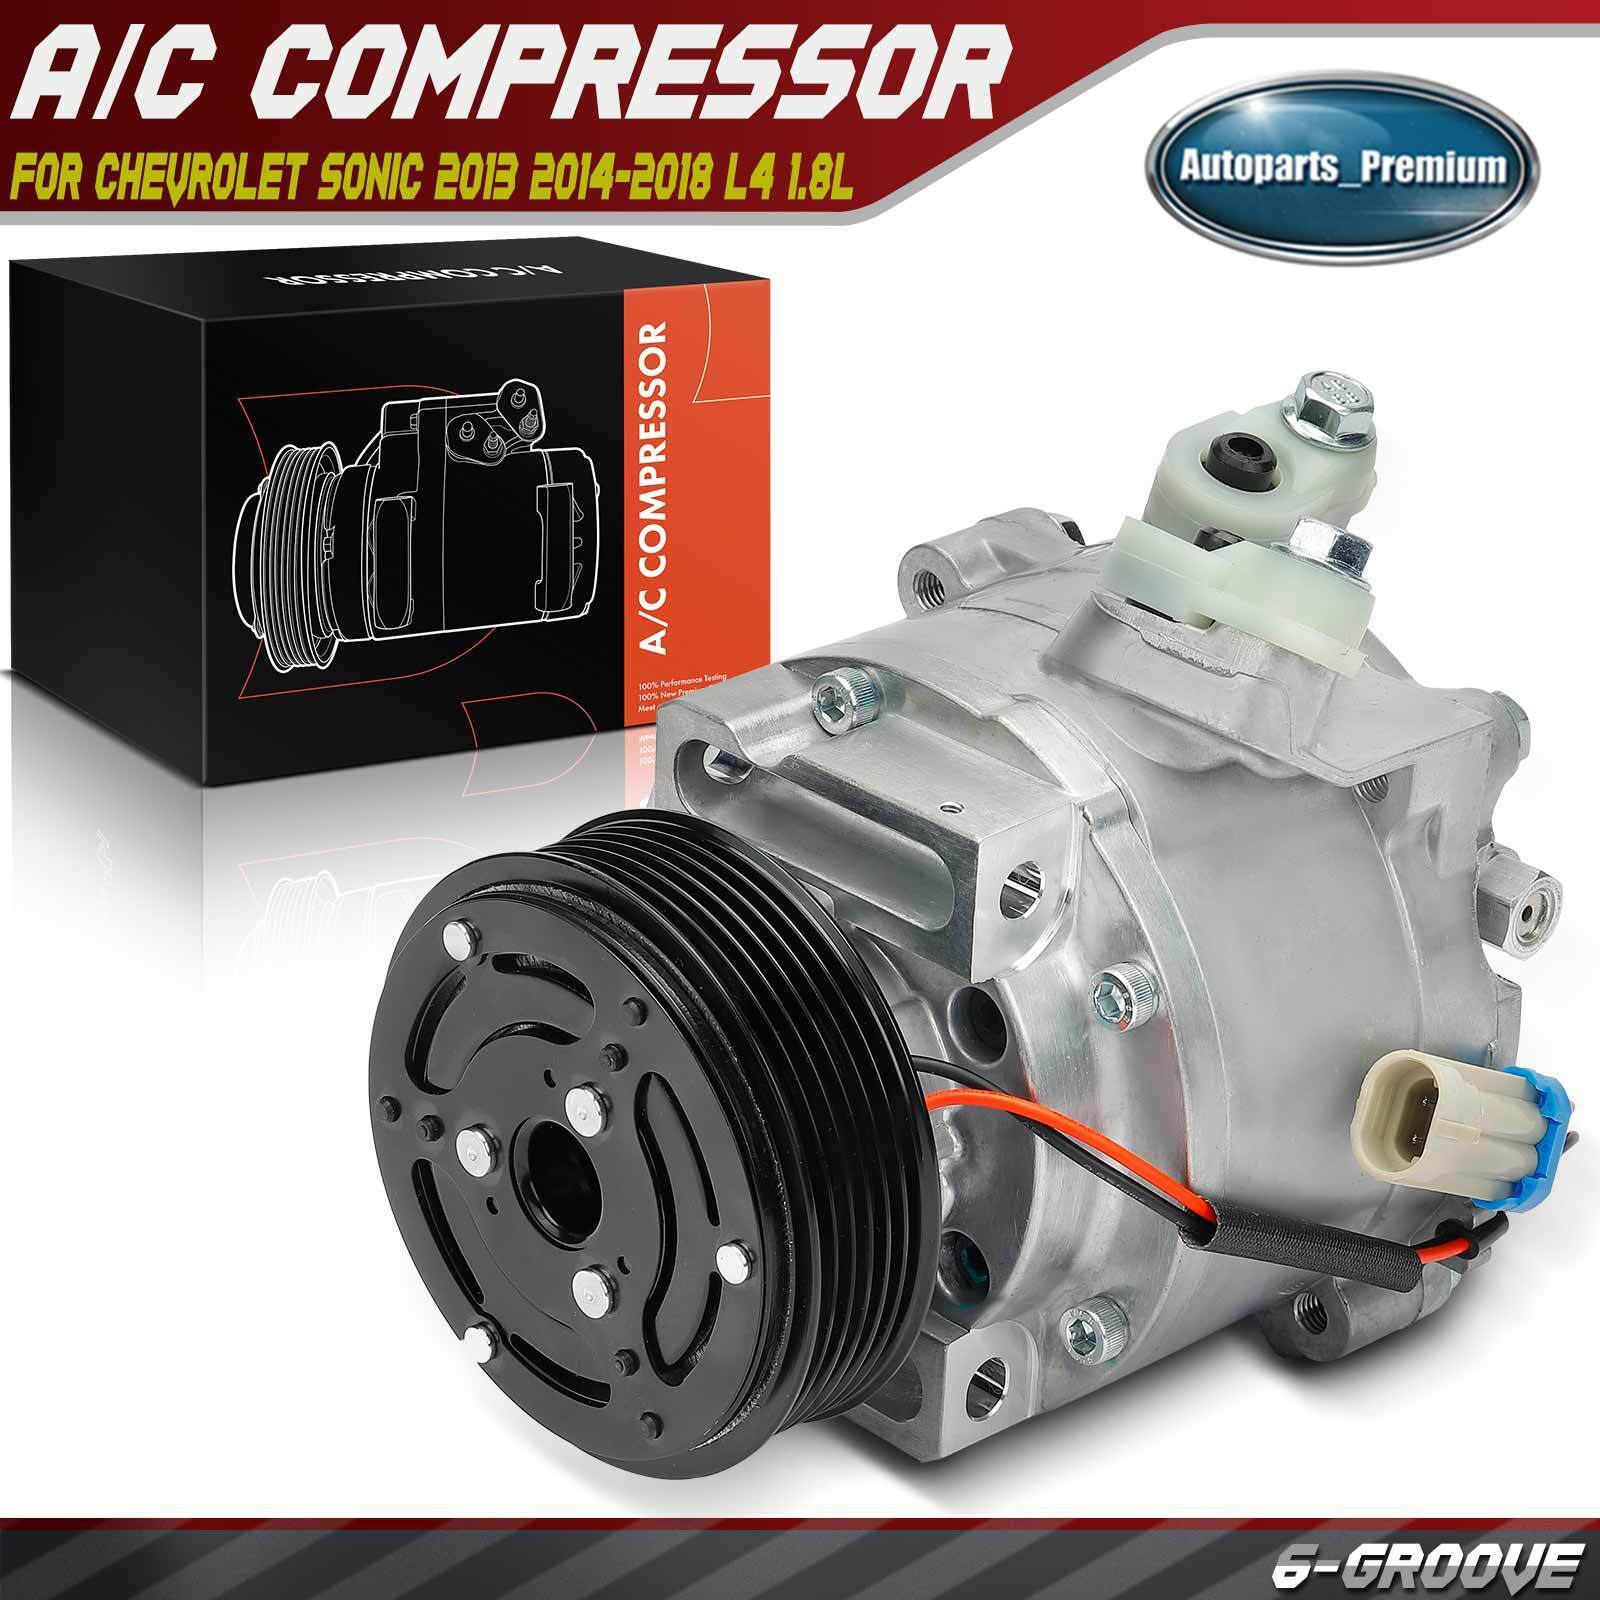 New A/C Compressor with Clutch for Chevrolet Sonic 2013 2014 2015-2018 L4 1.8L